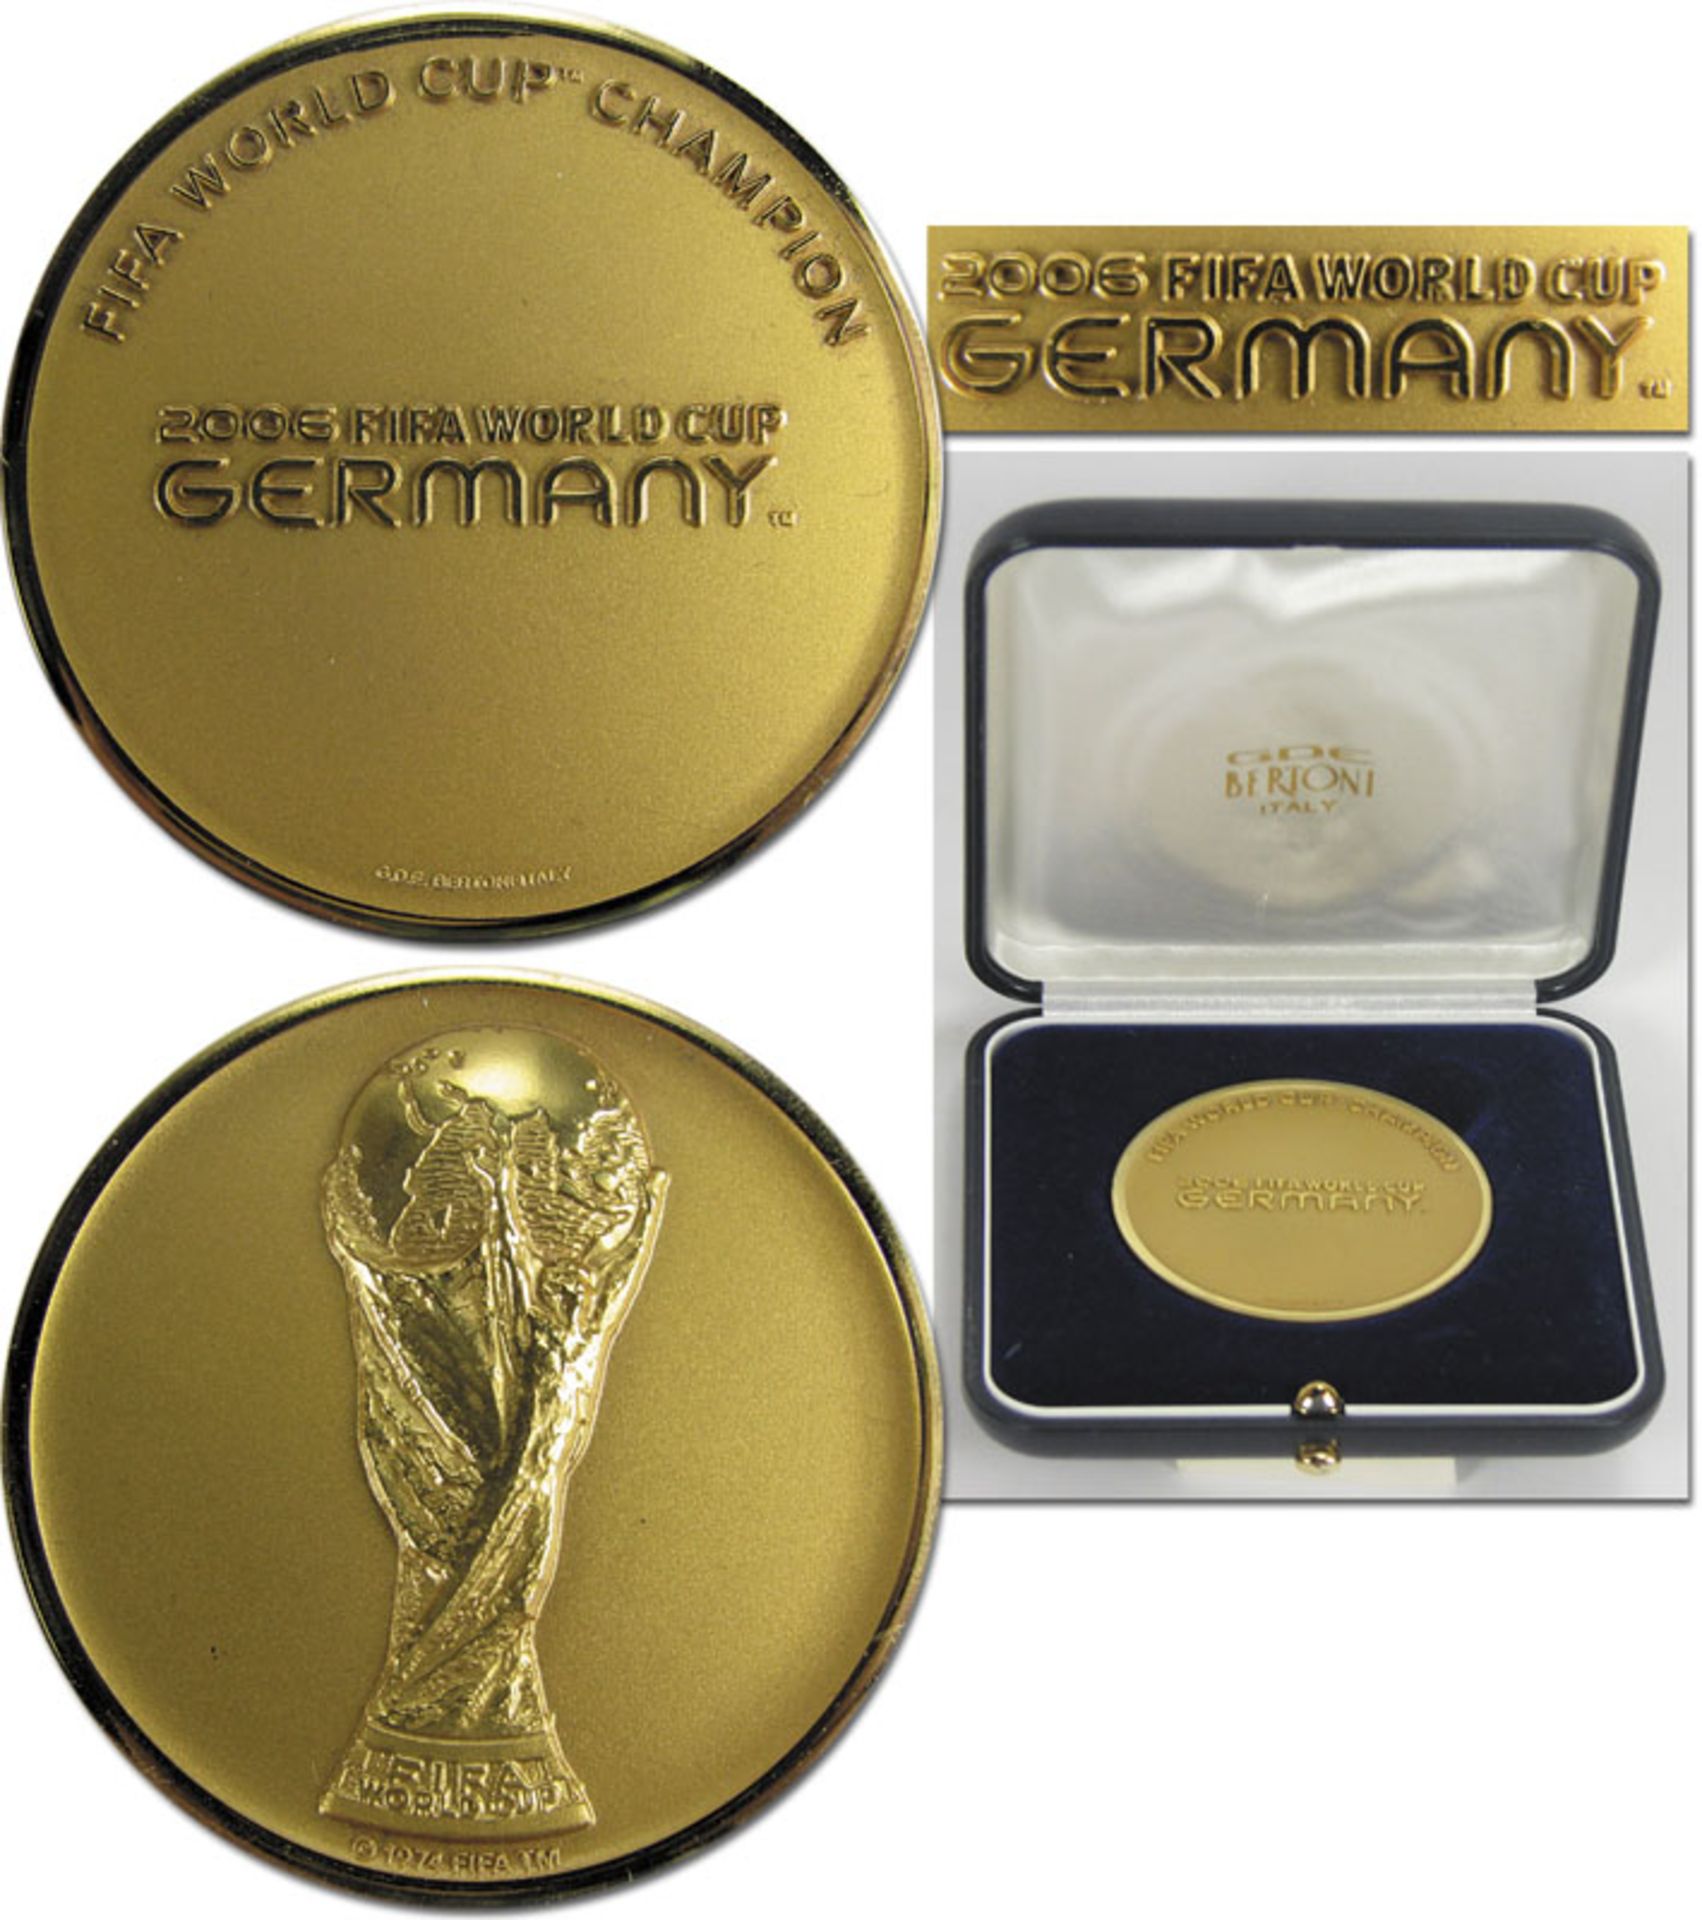 World Cup 2006. Official FIFA Participation medal - „FIFA World Cup Champion. 2006 FIFA World Cup Ge